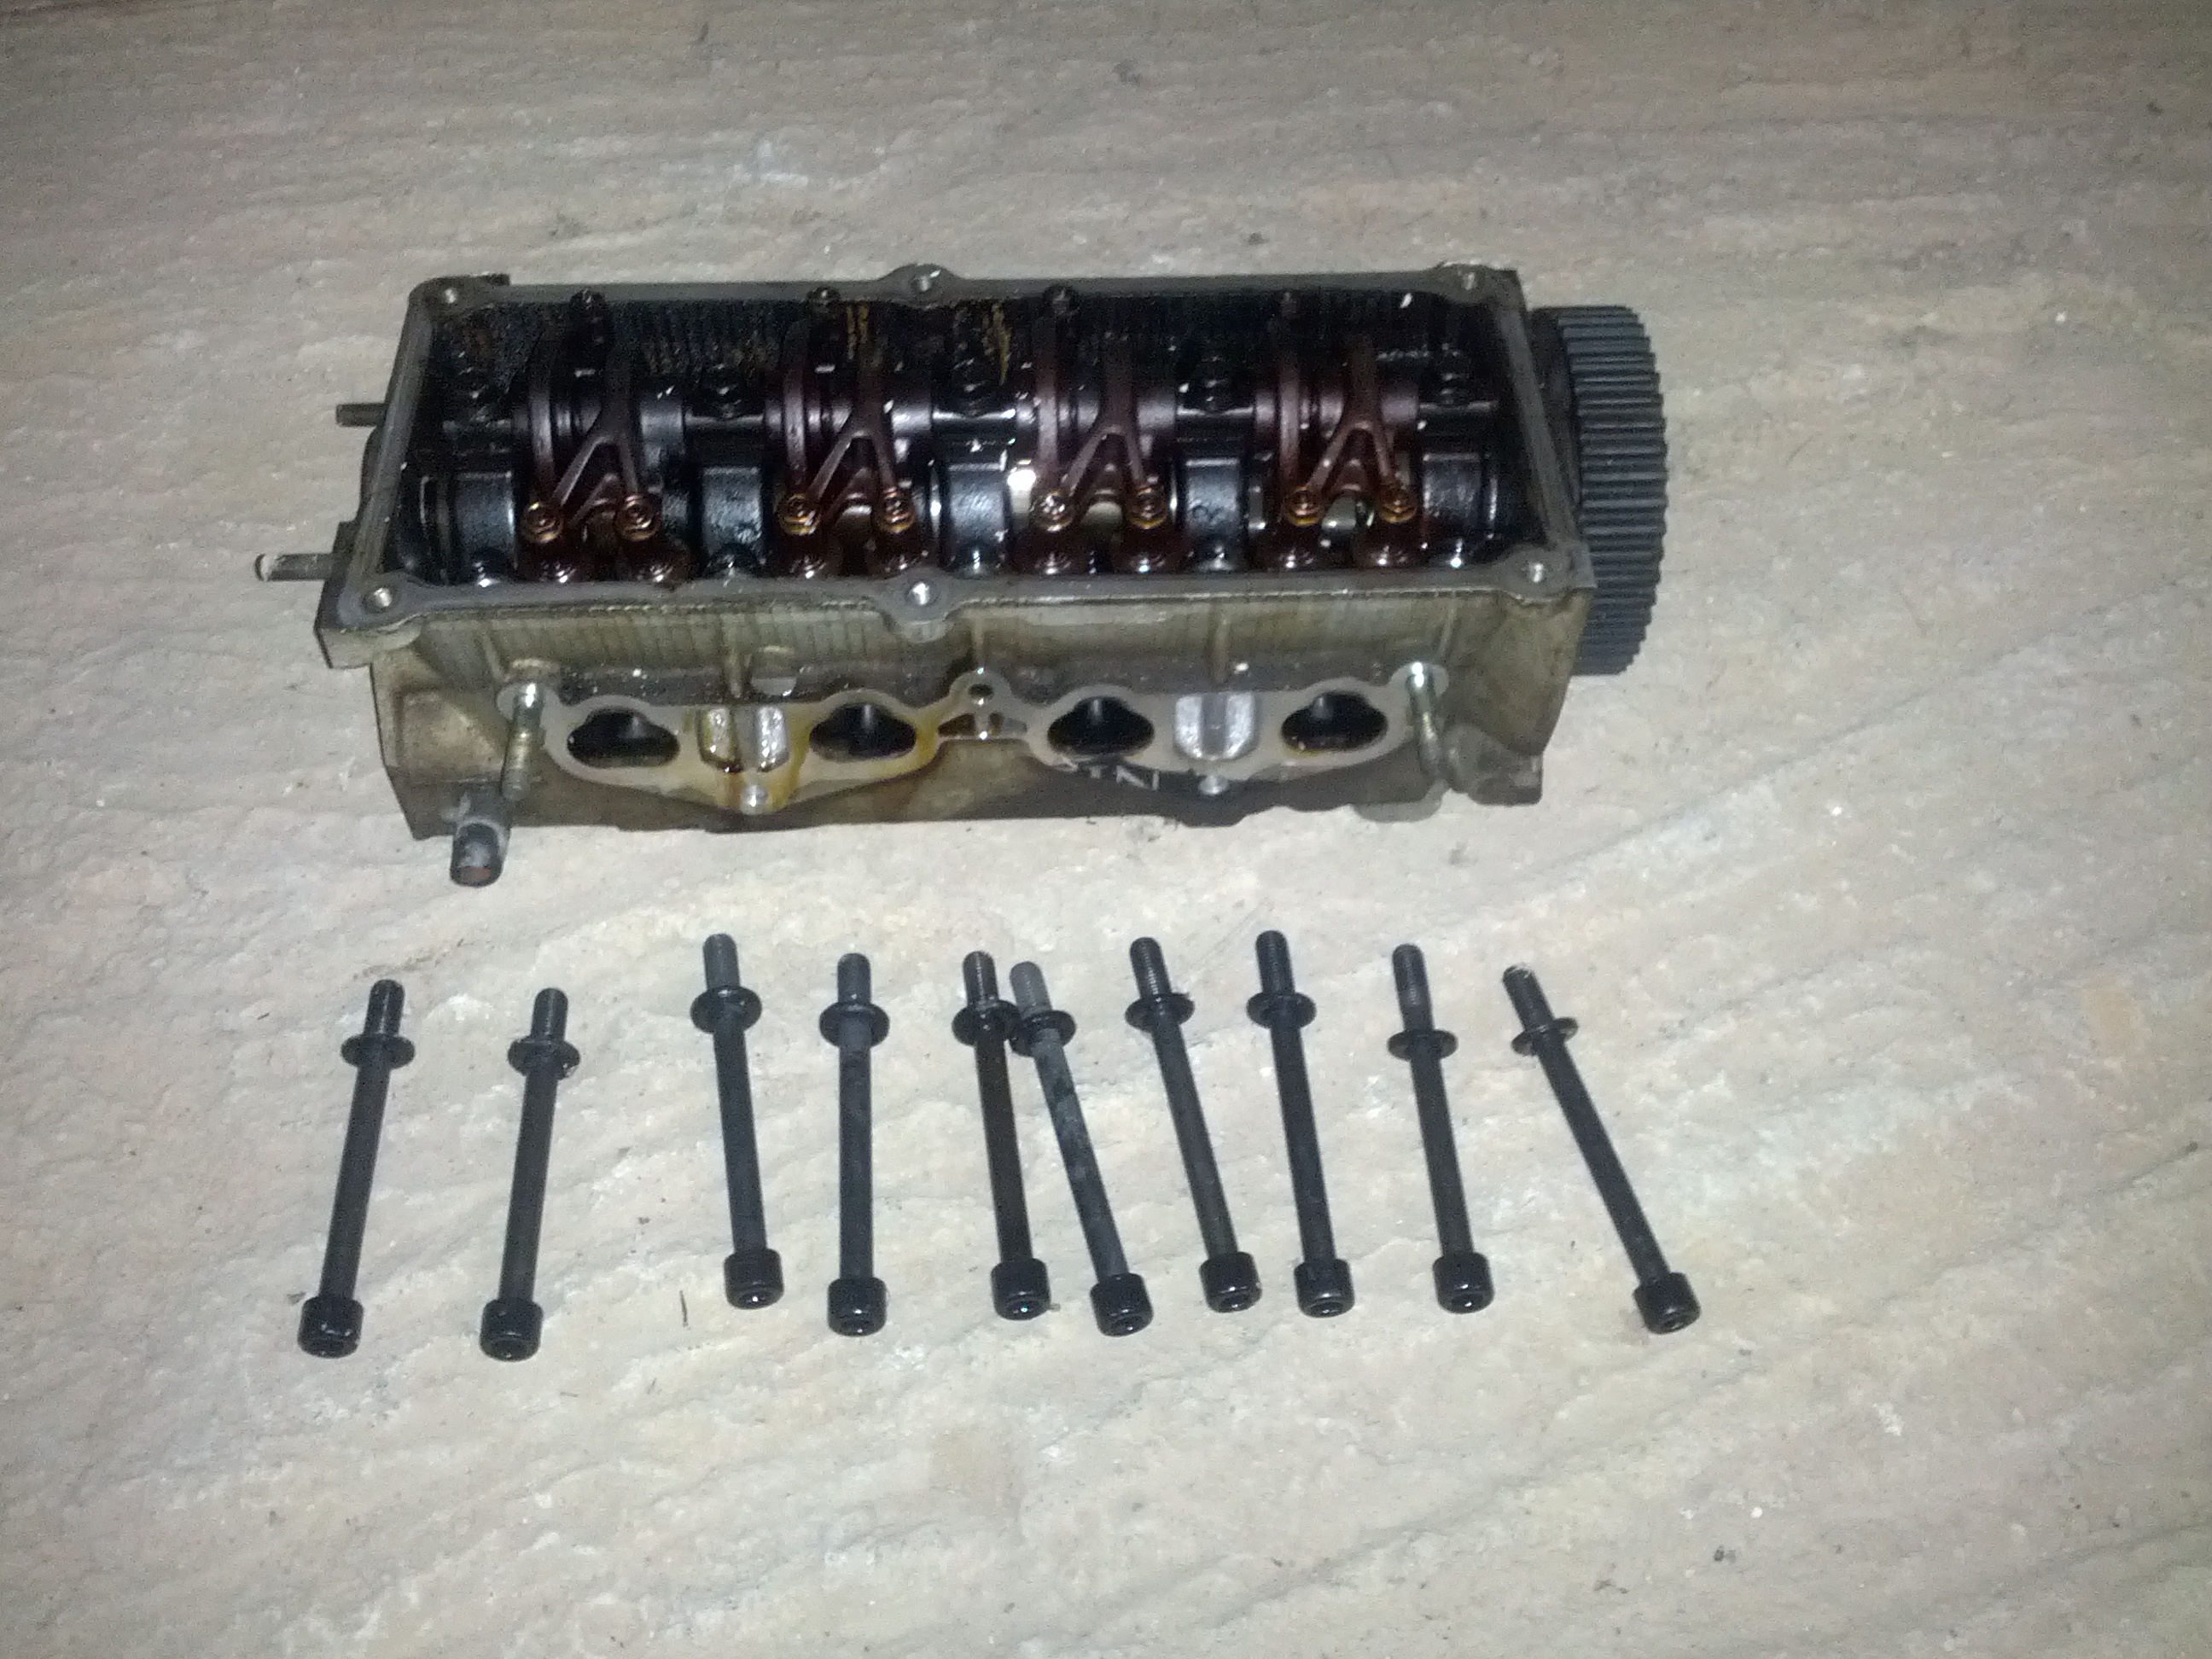 09-cylinder head with bolts